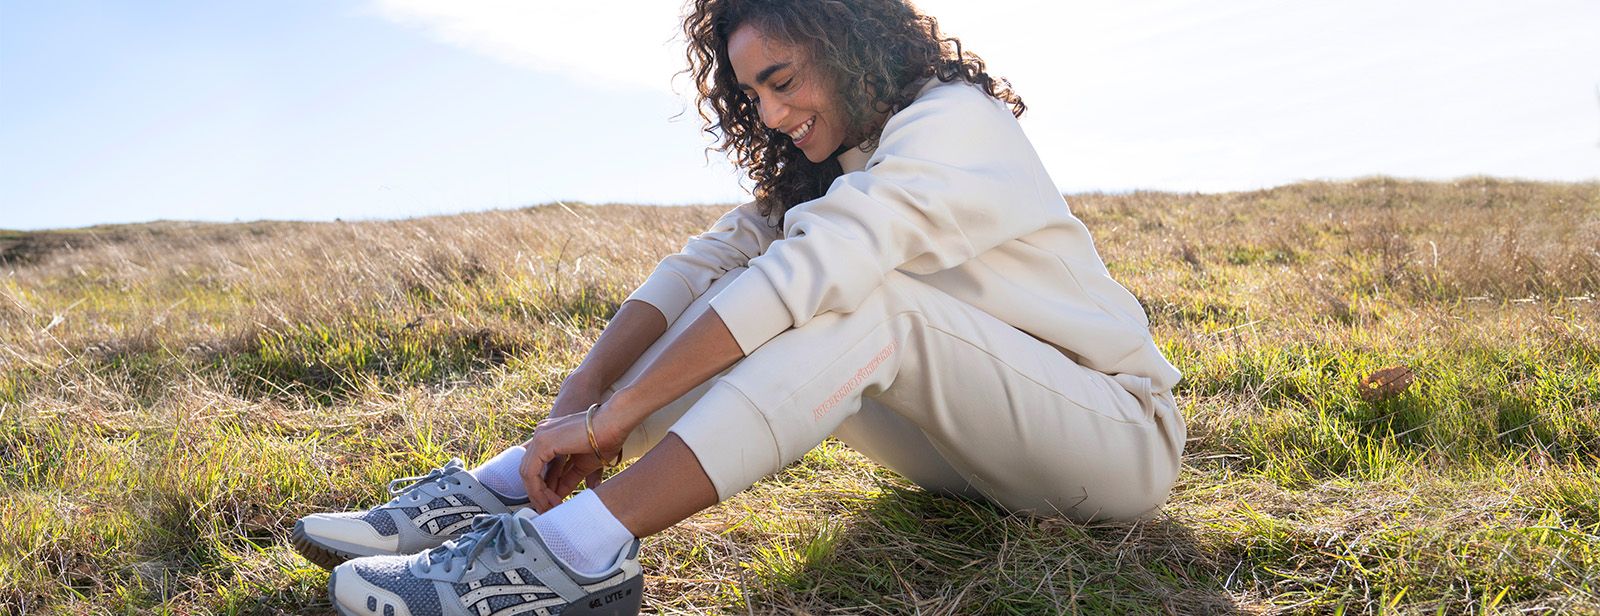 Woman sitting in field in ASICS clothing.